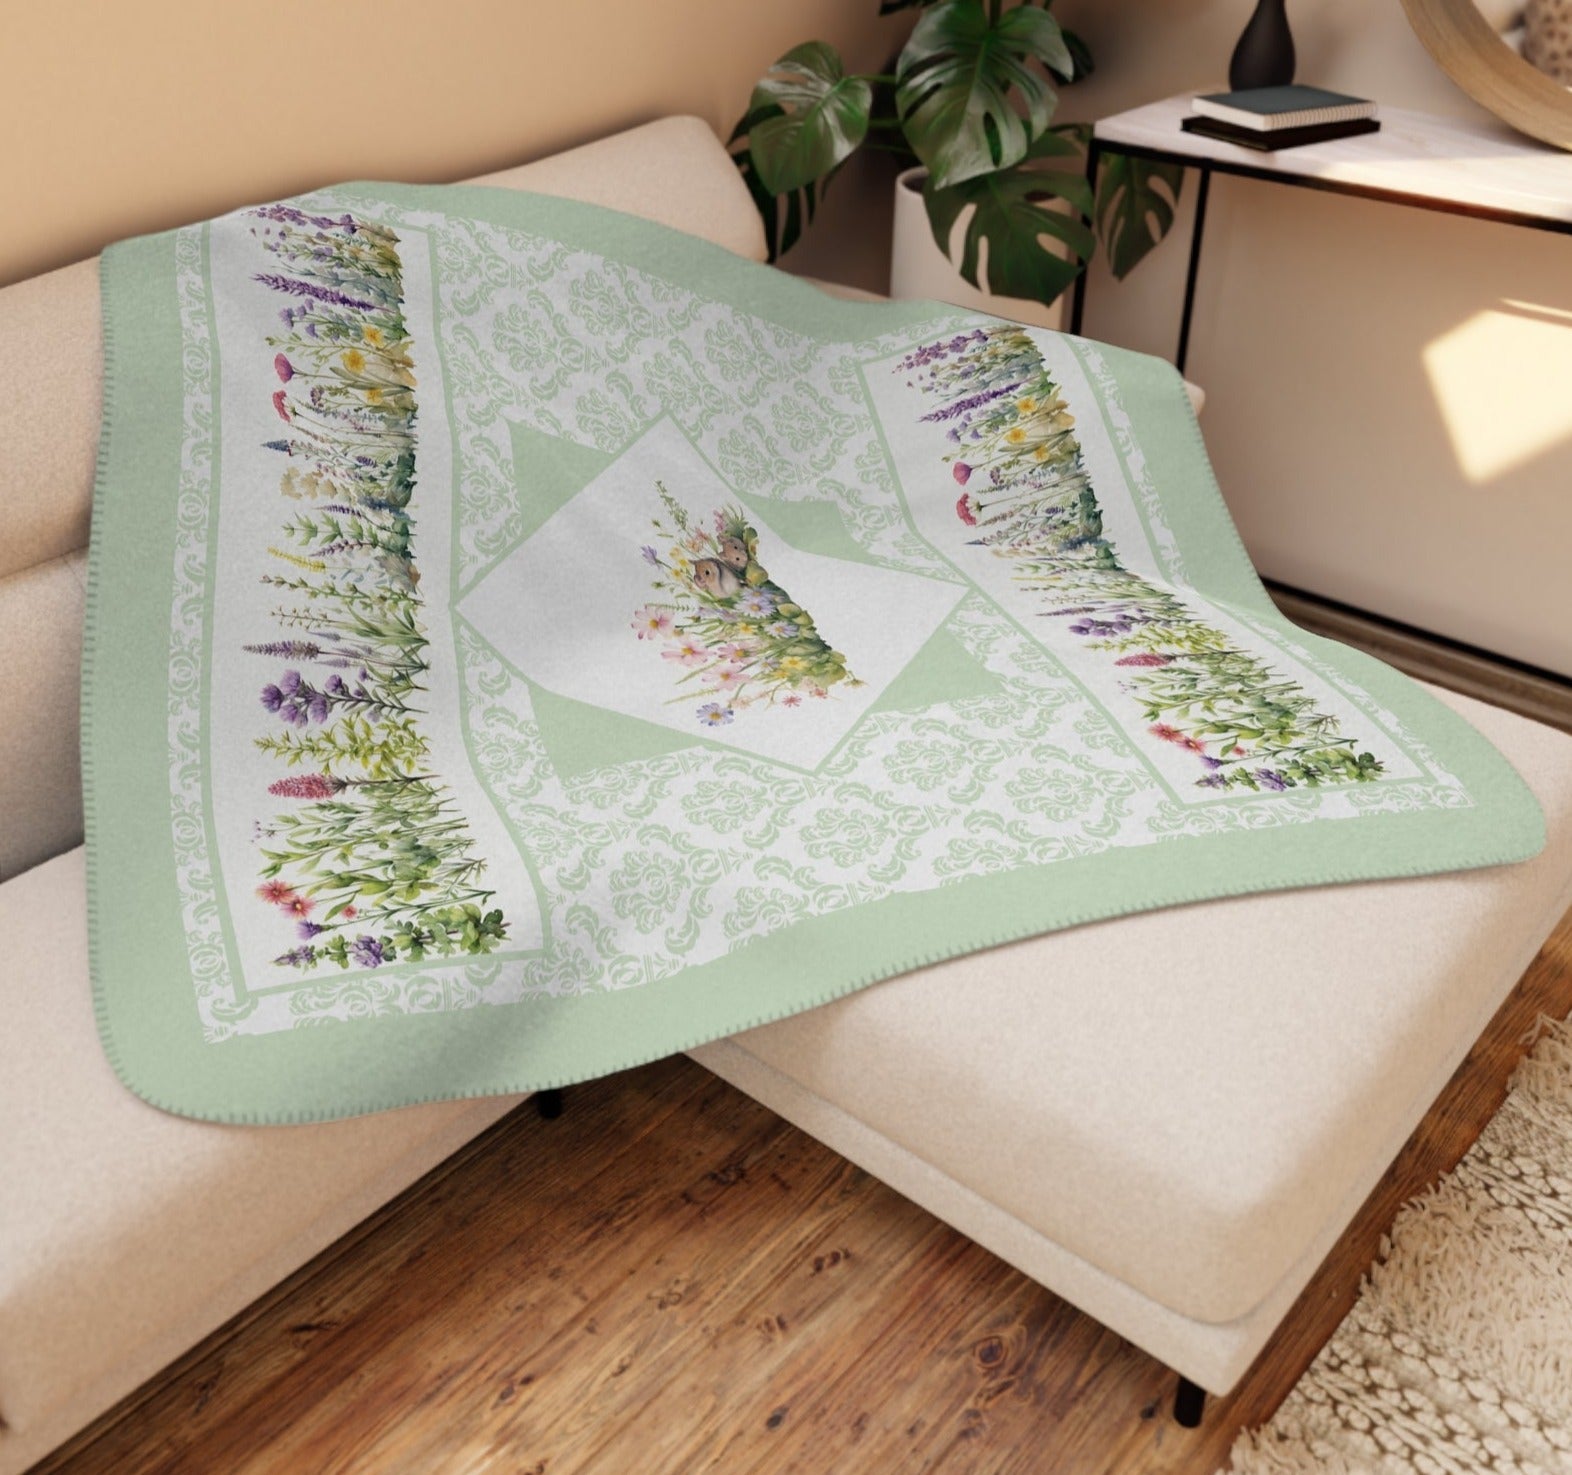 Herb Garden Throw Blanket with Cute Mouse, Damask Print Background - FlooredByArt